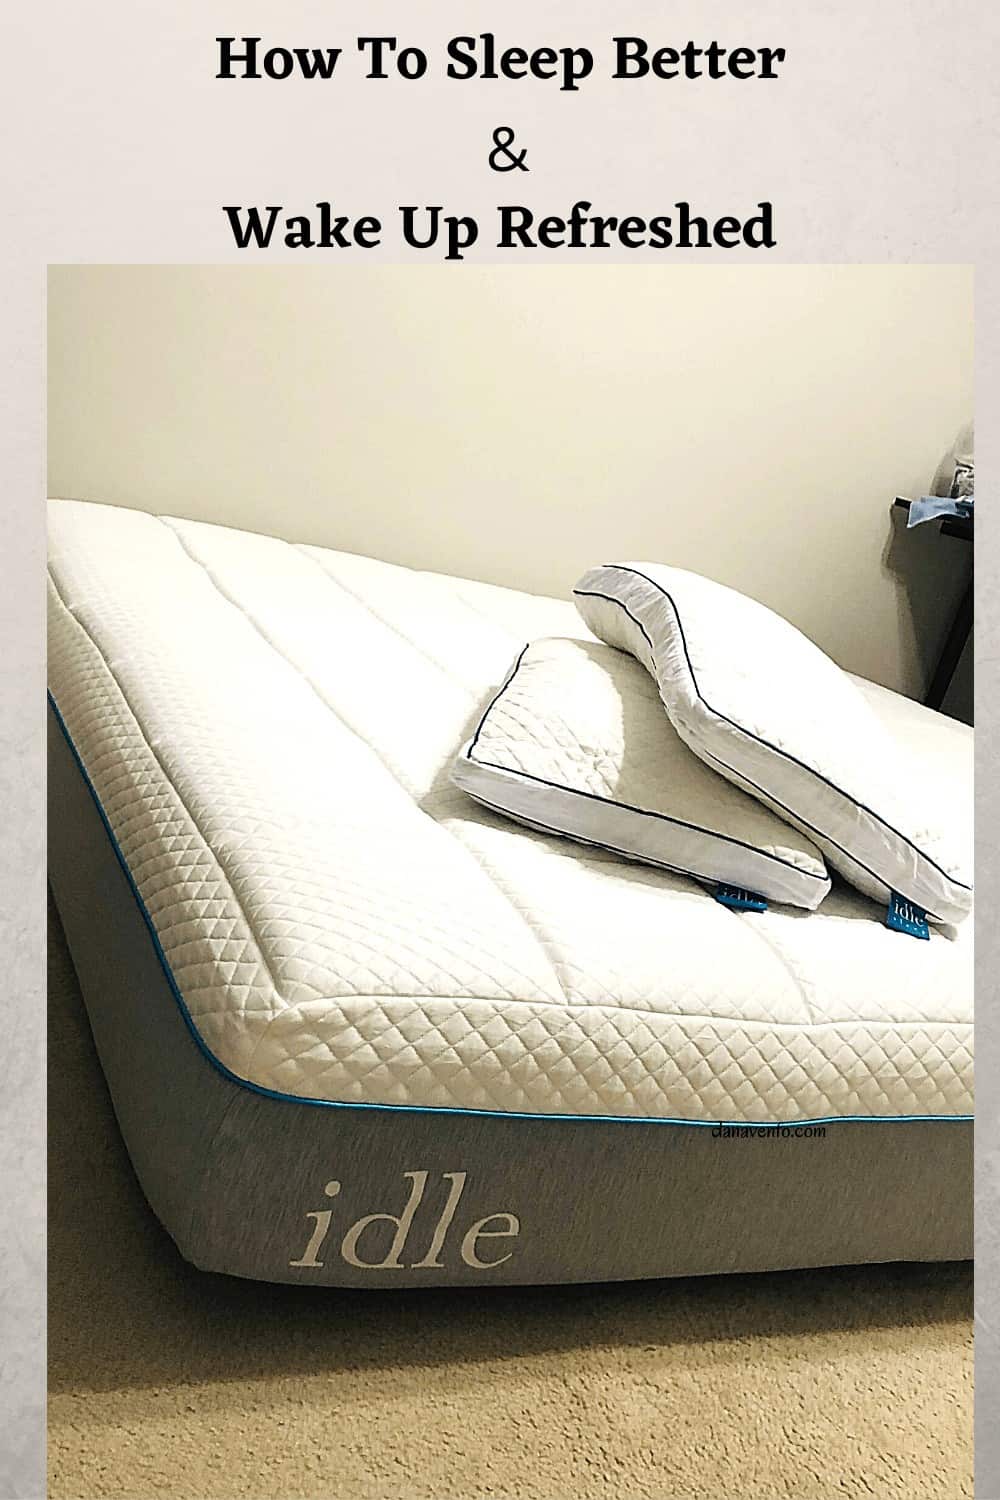 Idle Mattress and Pillow. How to sleep better 